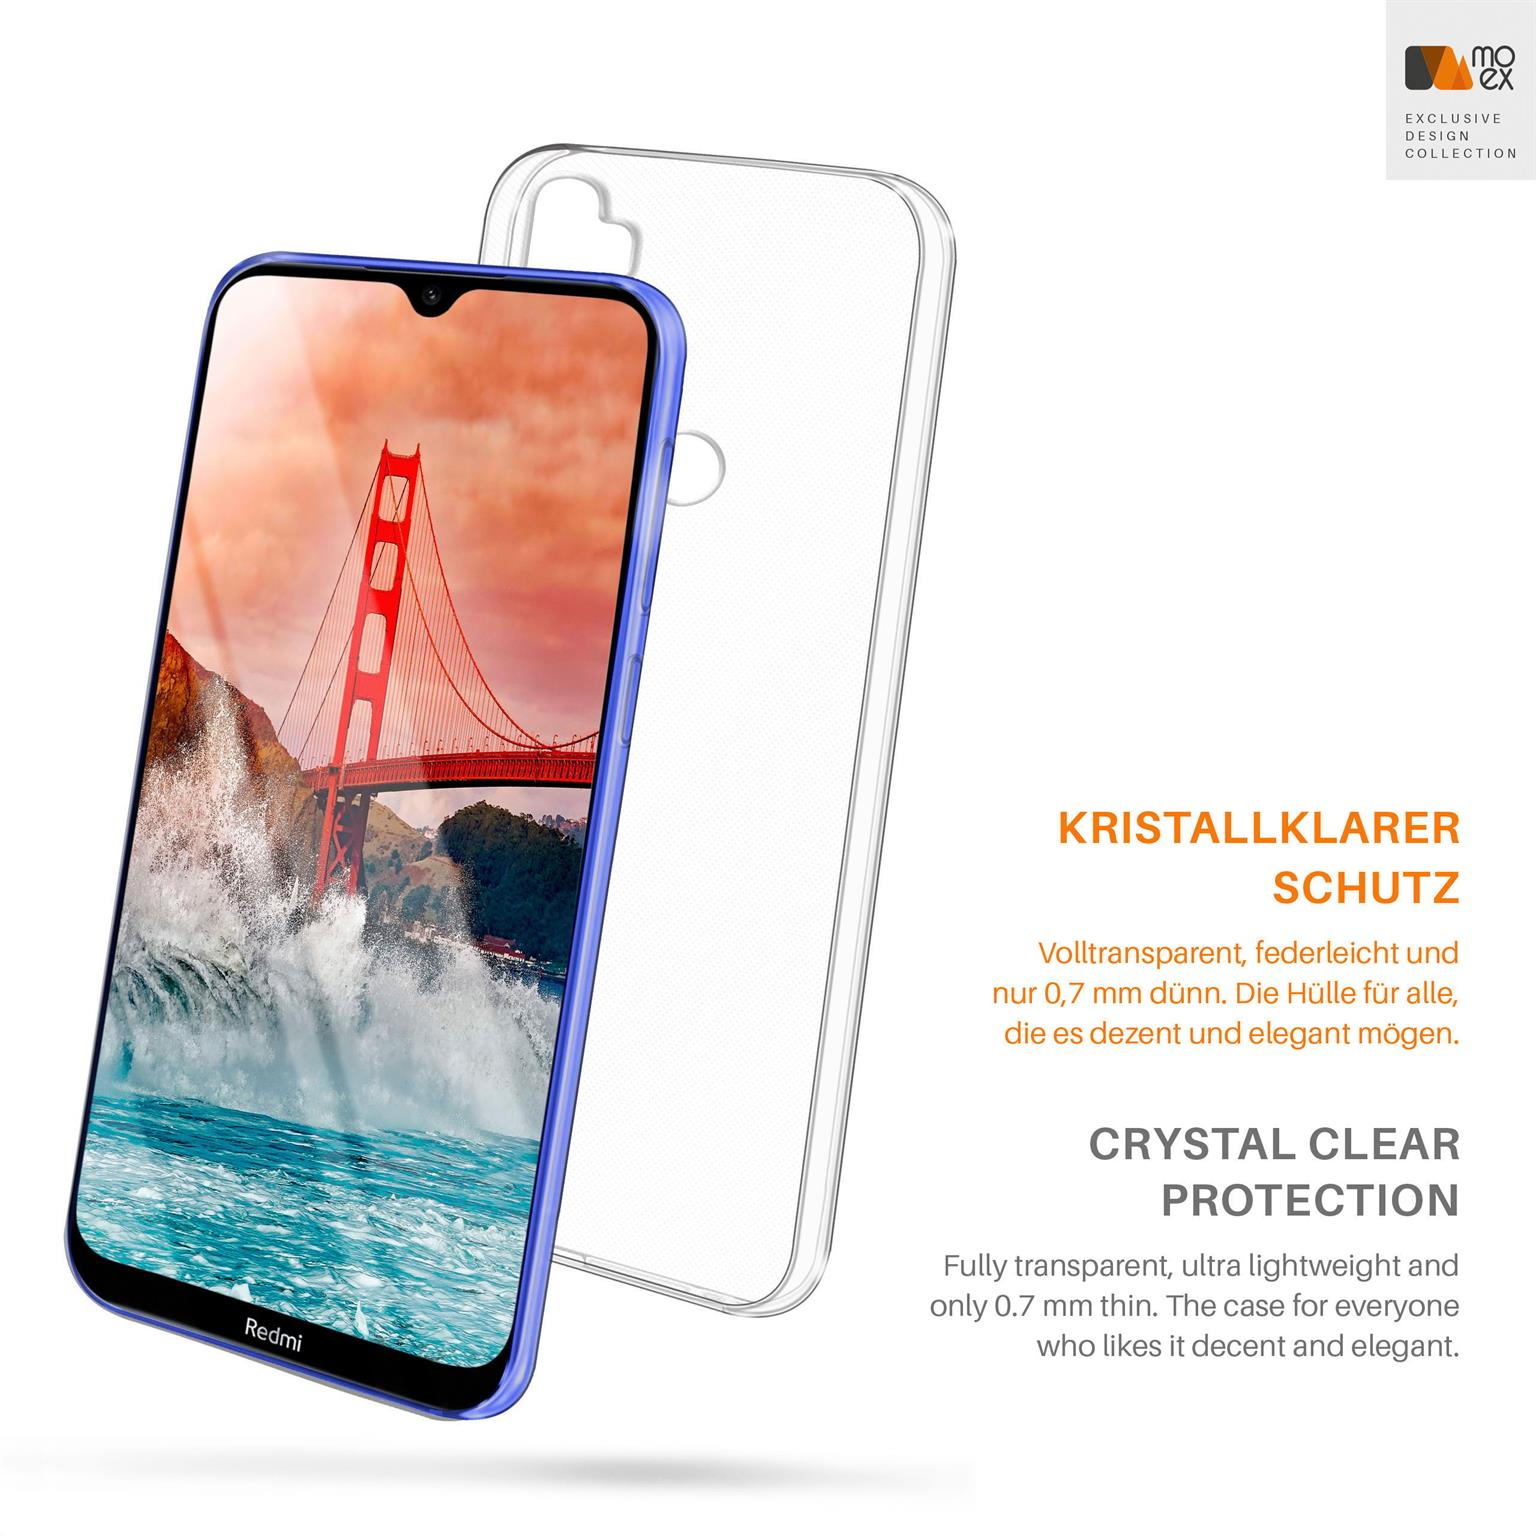 MOEX Aero Xiaomi, Redmi Note Crystal-Clear 8T, Case, Backcover